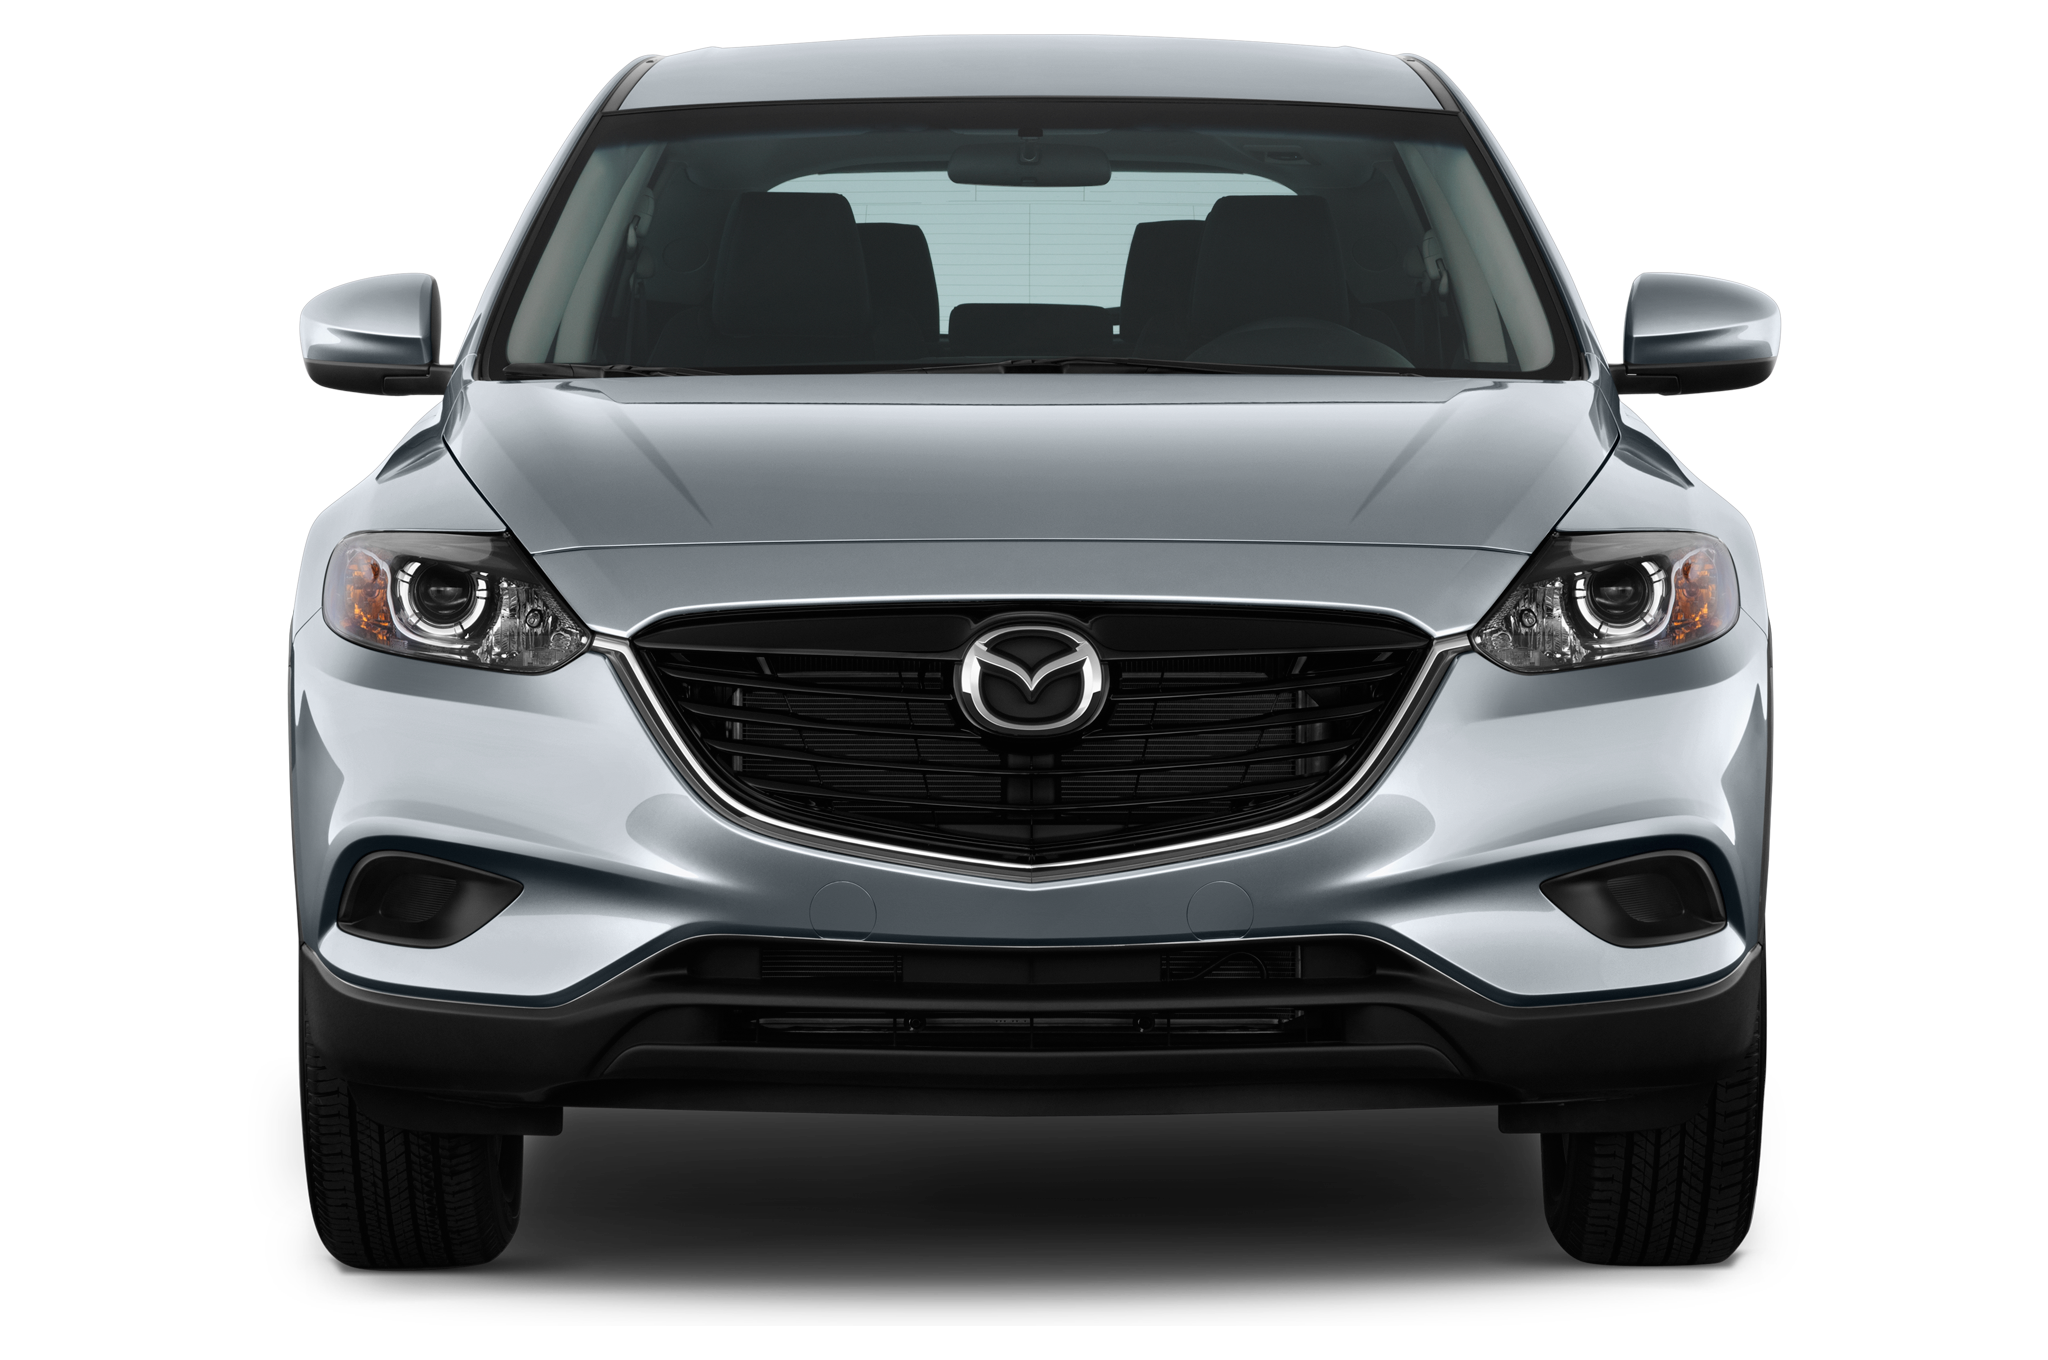 Mazda Cx 9 2014 International Price And Overview